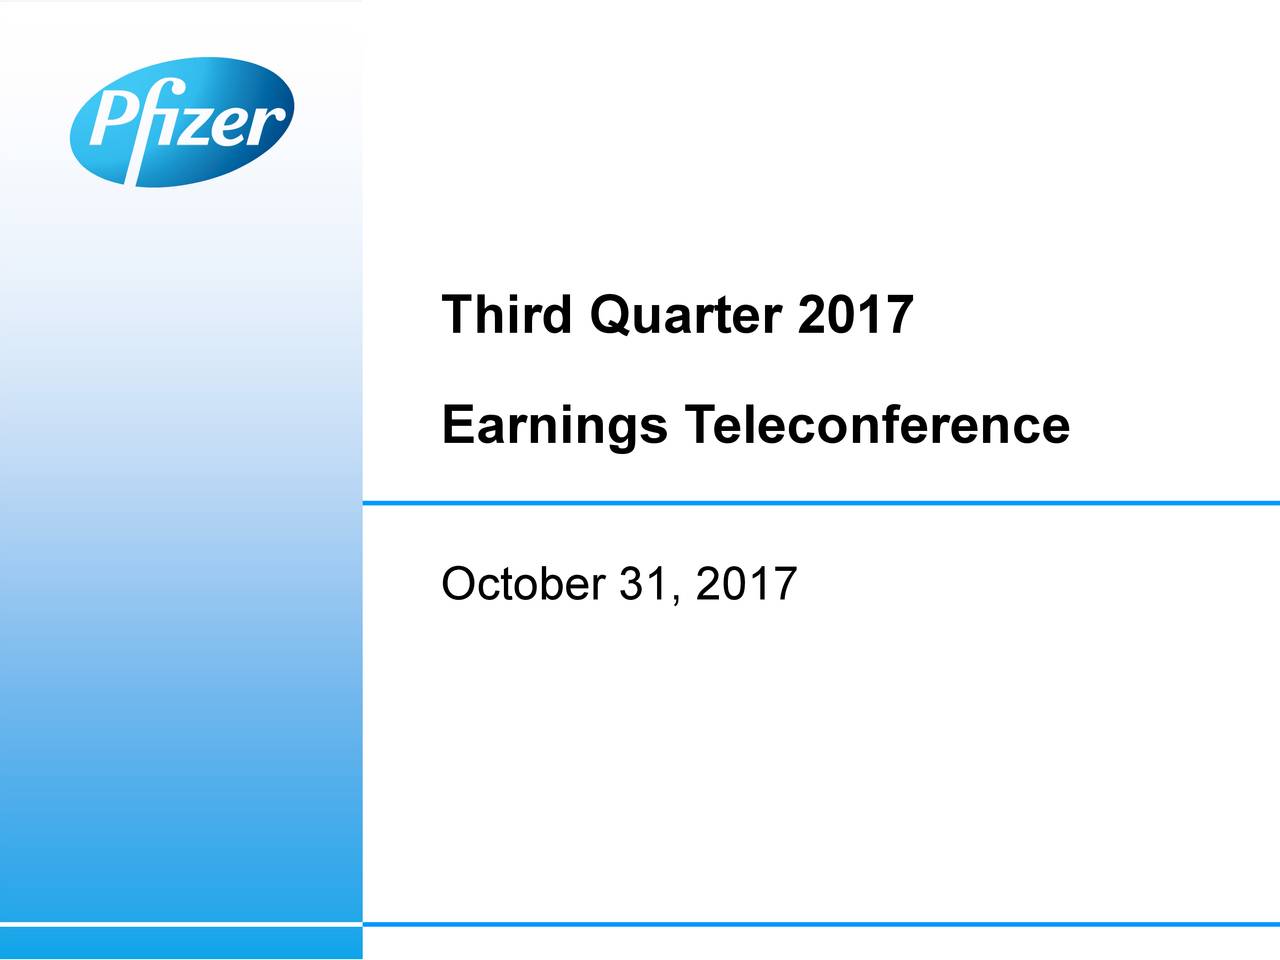 Earnings Teleconference October 31, 2017